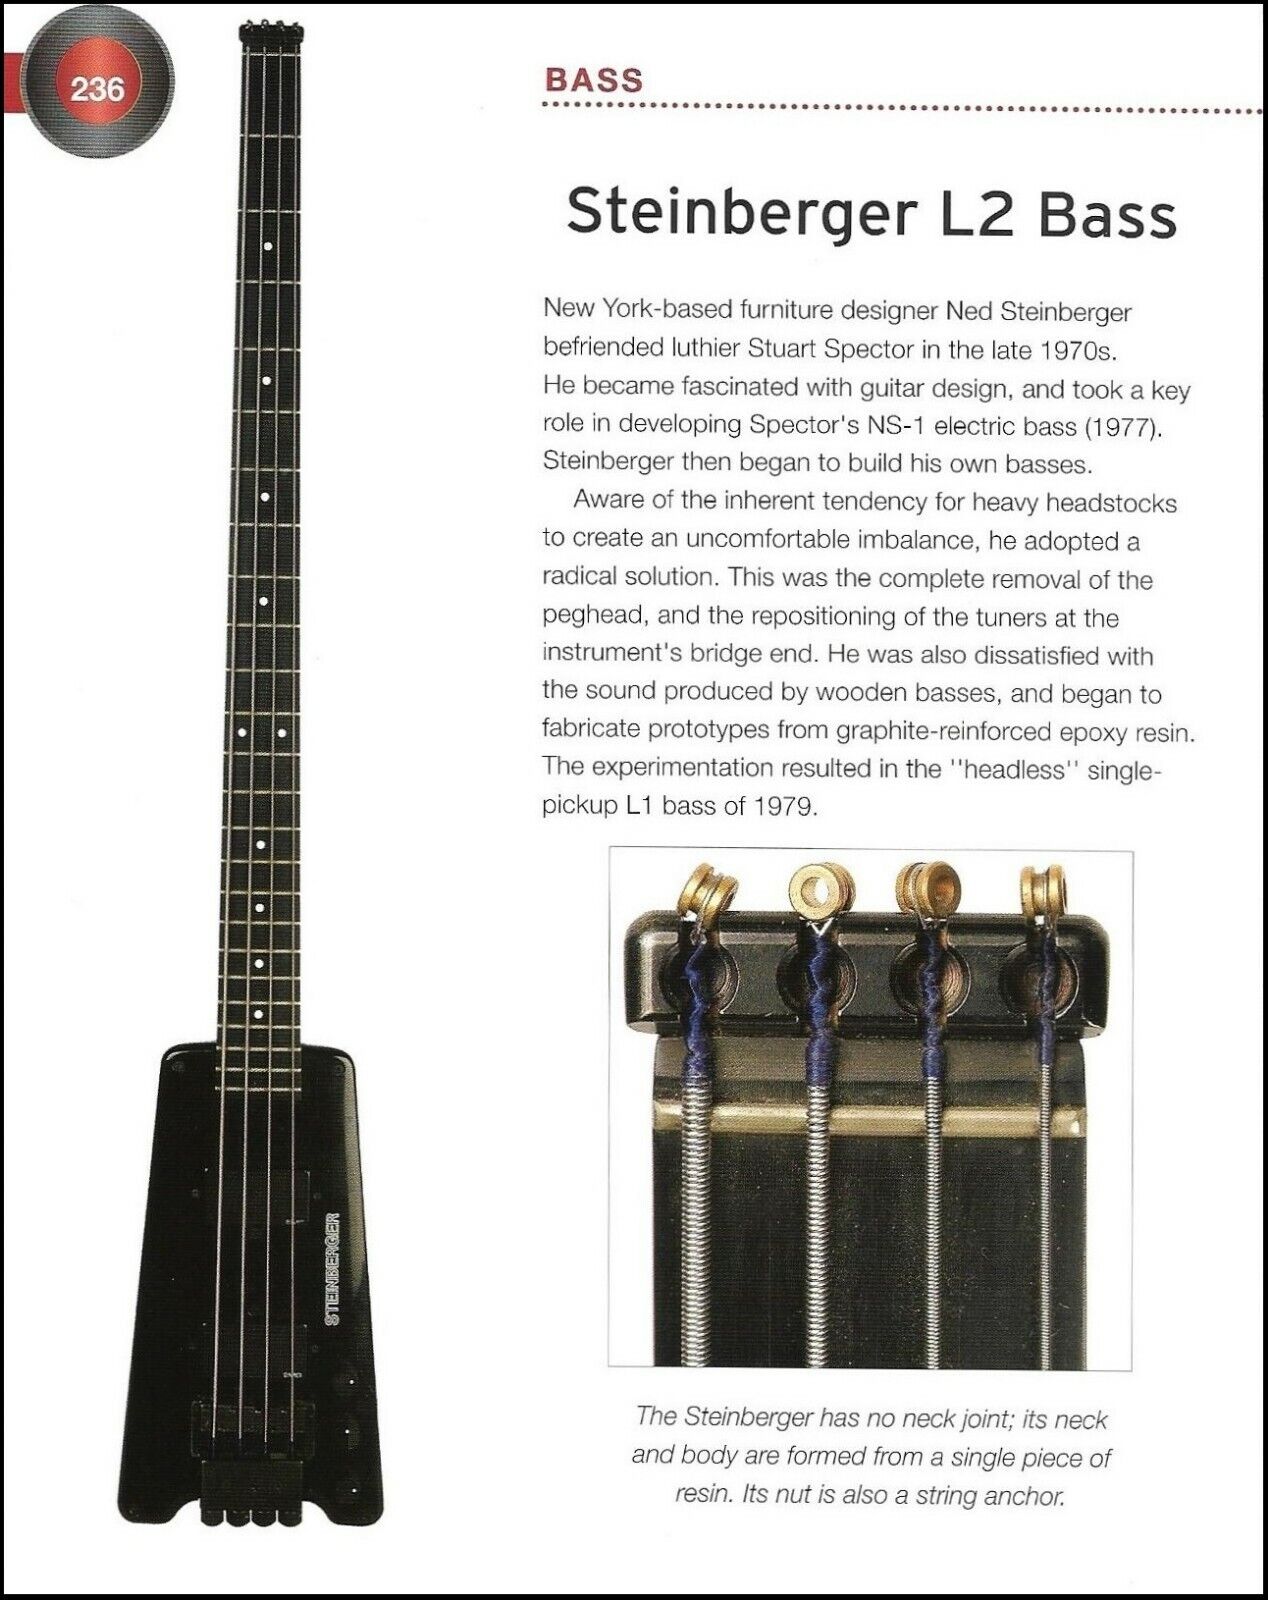 Steinberger L2 Headless Bass + Fender Squier Obey Telecaster Guitar 6x8 article